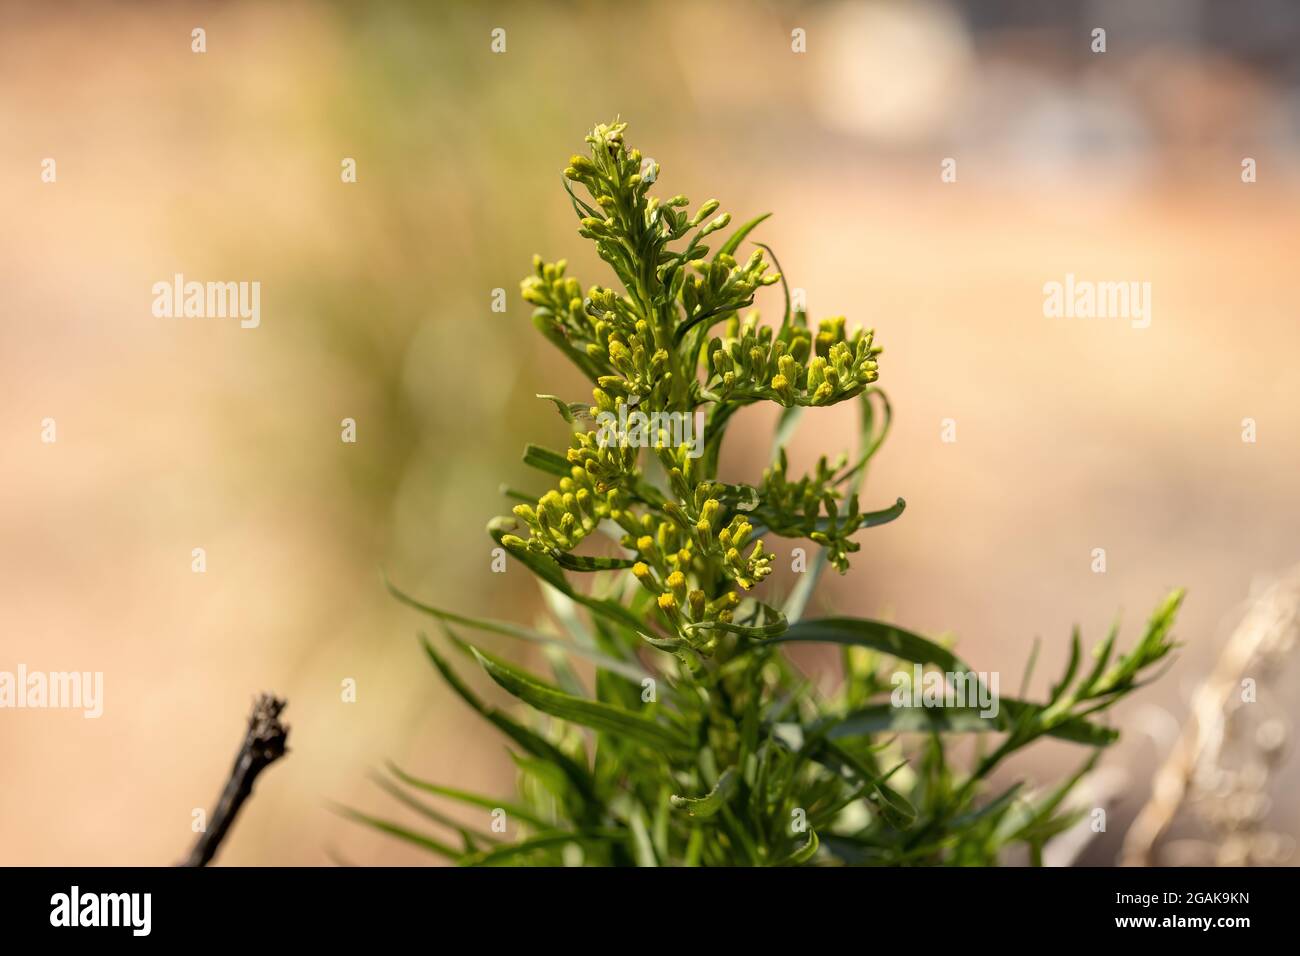 Anise Goldenrod Plant of the species Solidago chilensis with selective focus Stock Photo